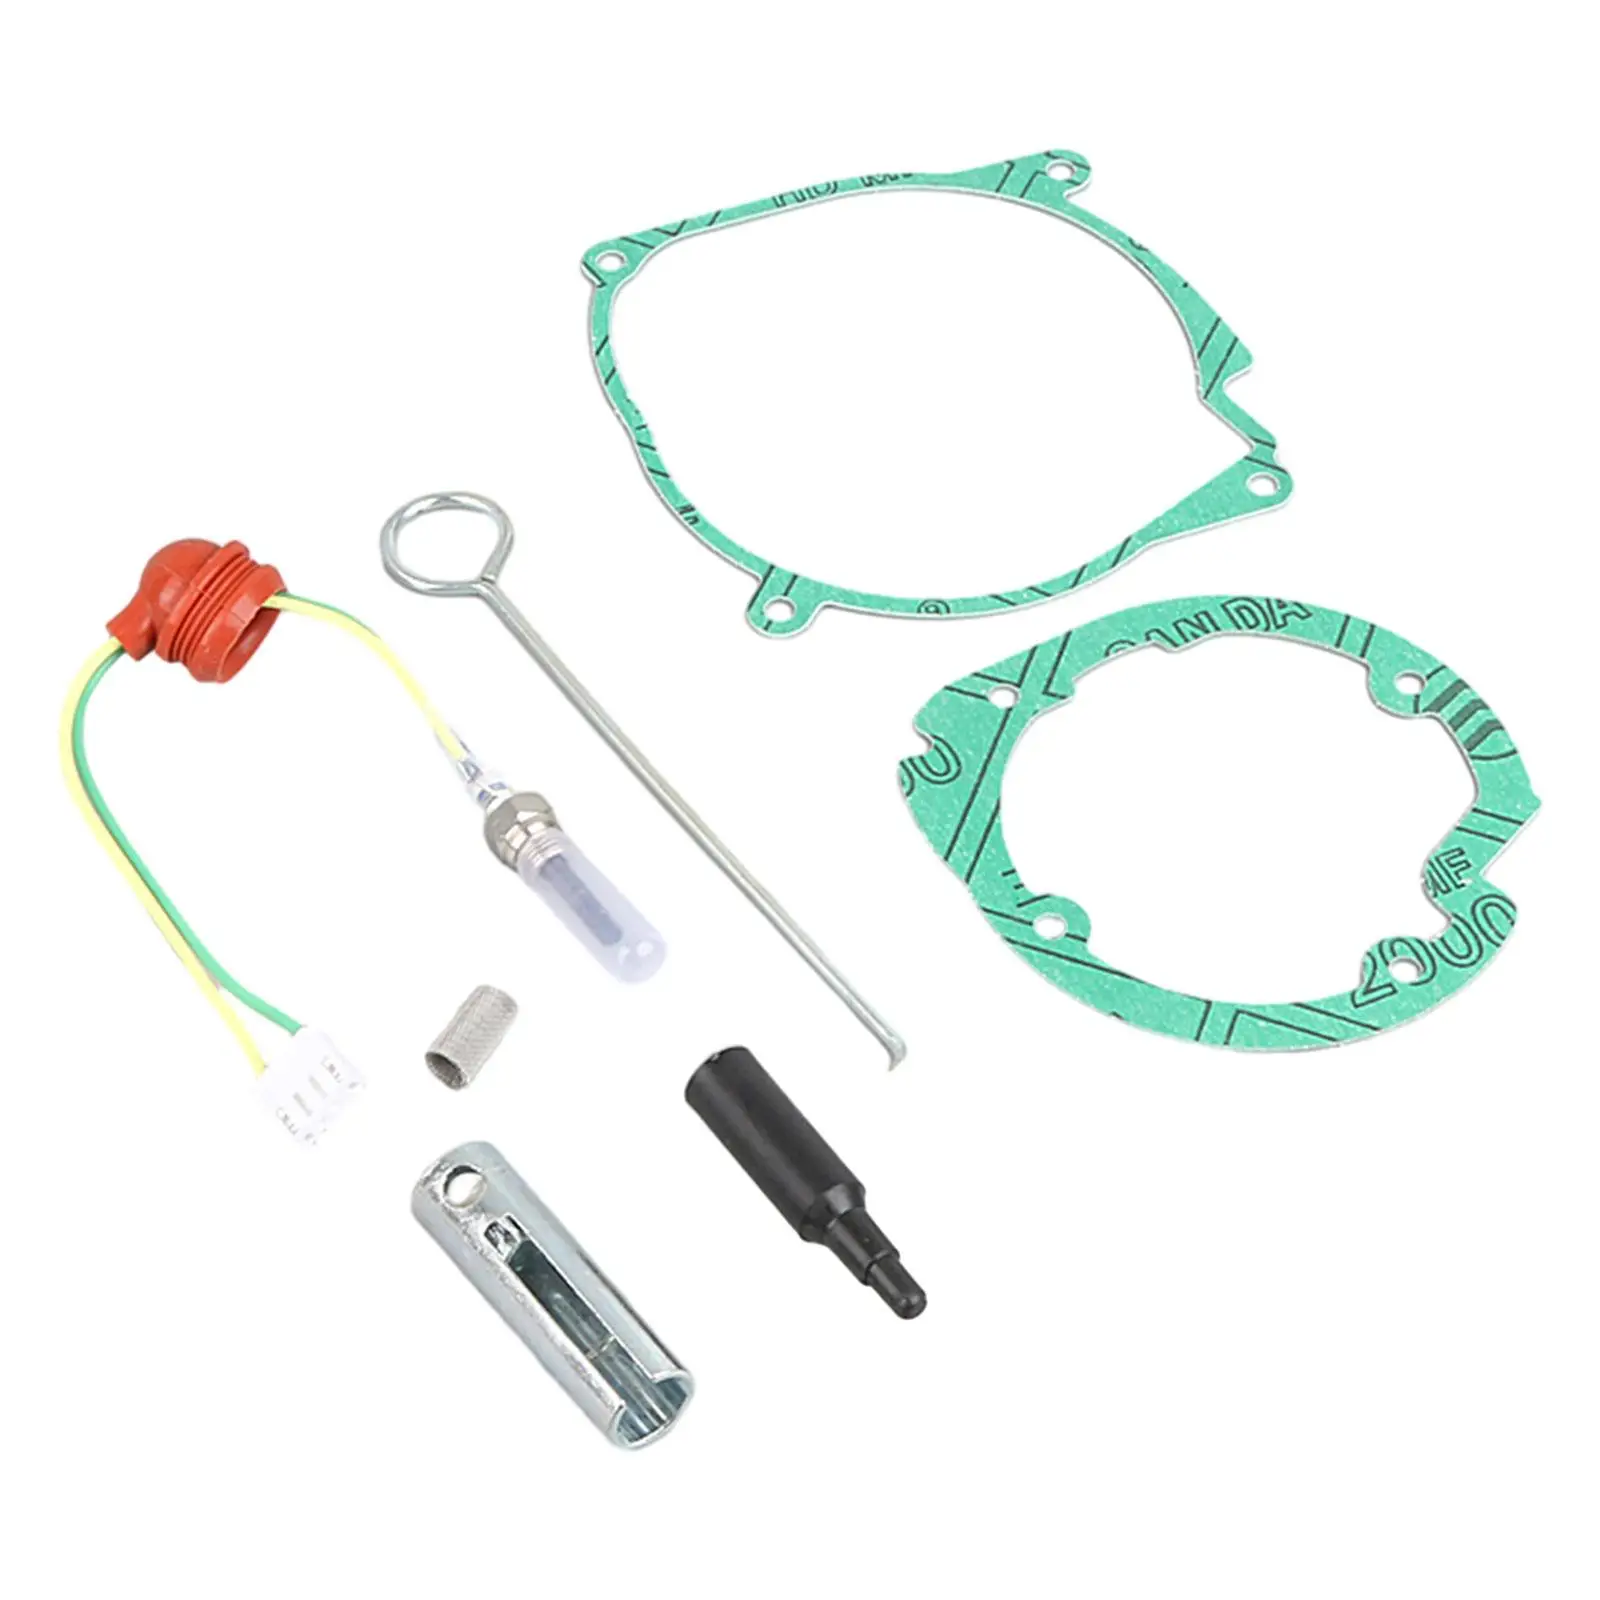 Glow Plug Repair Kit Accessories Parts Replacement Net Sturdy Seal Repair Parts for 12V 5kW Parking Heater Truck Boat Truck